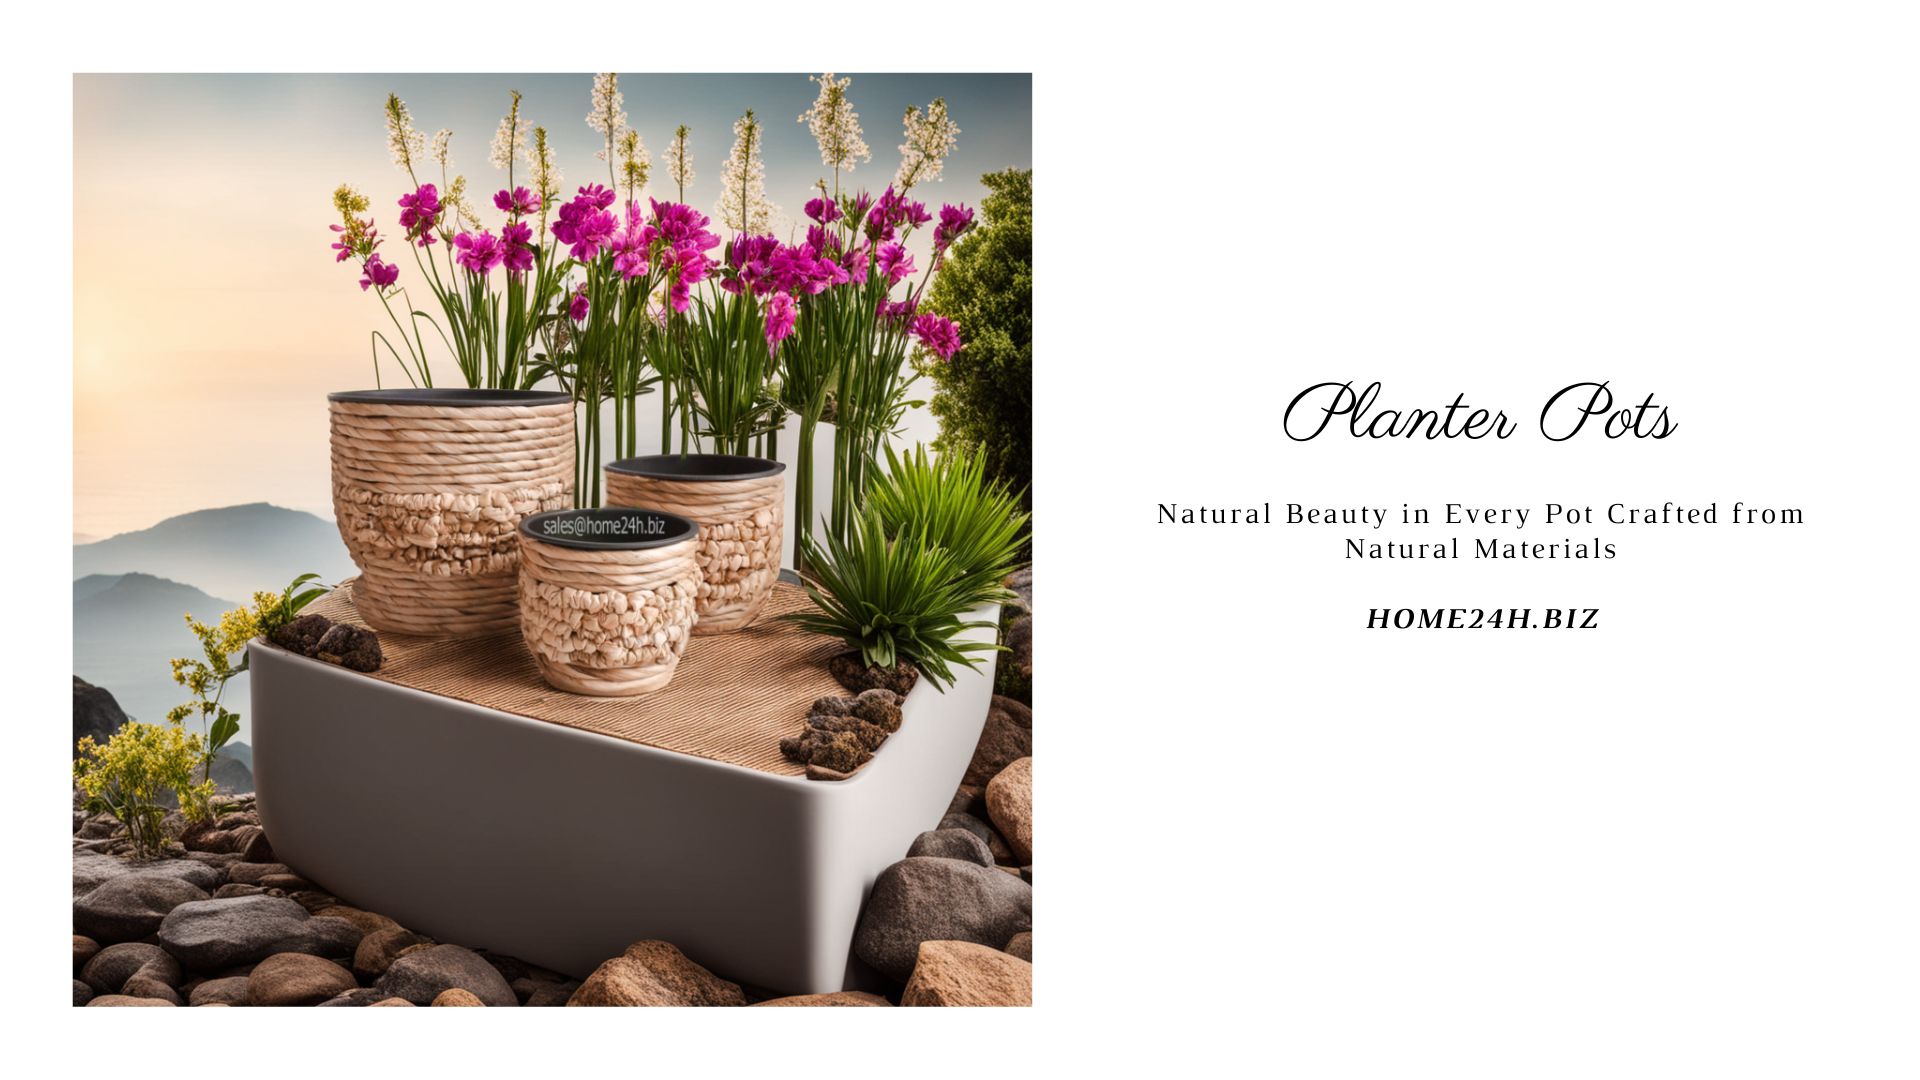 Planter Pots Crafted From Natural Materials